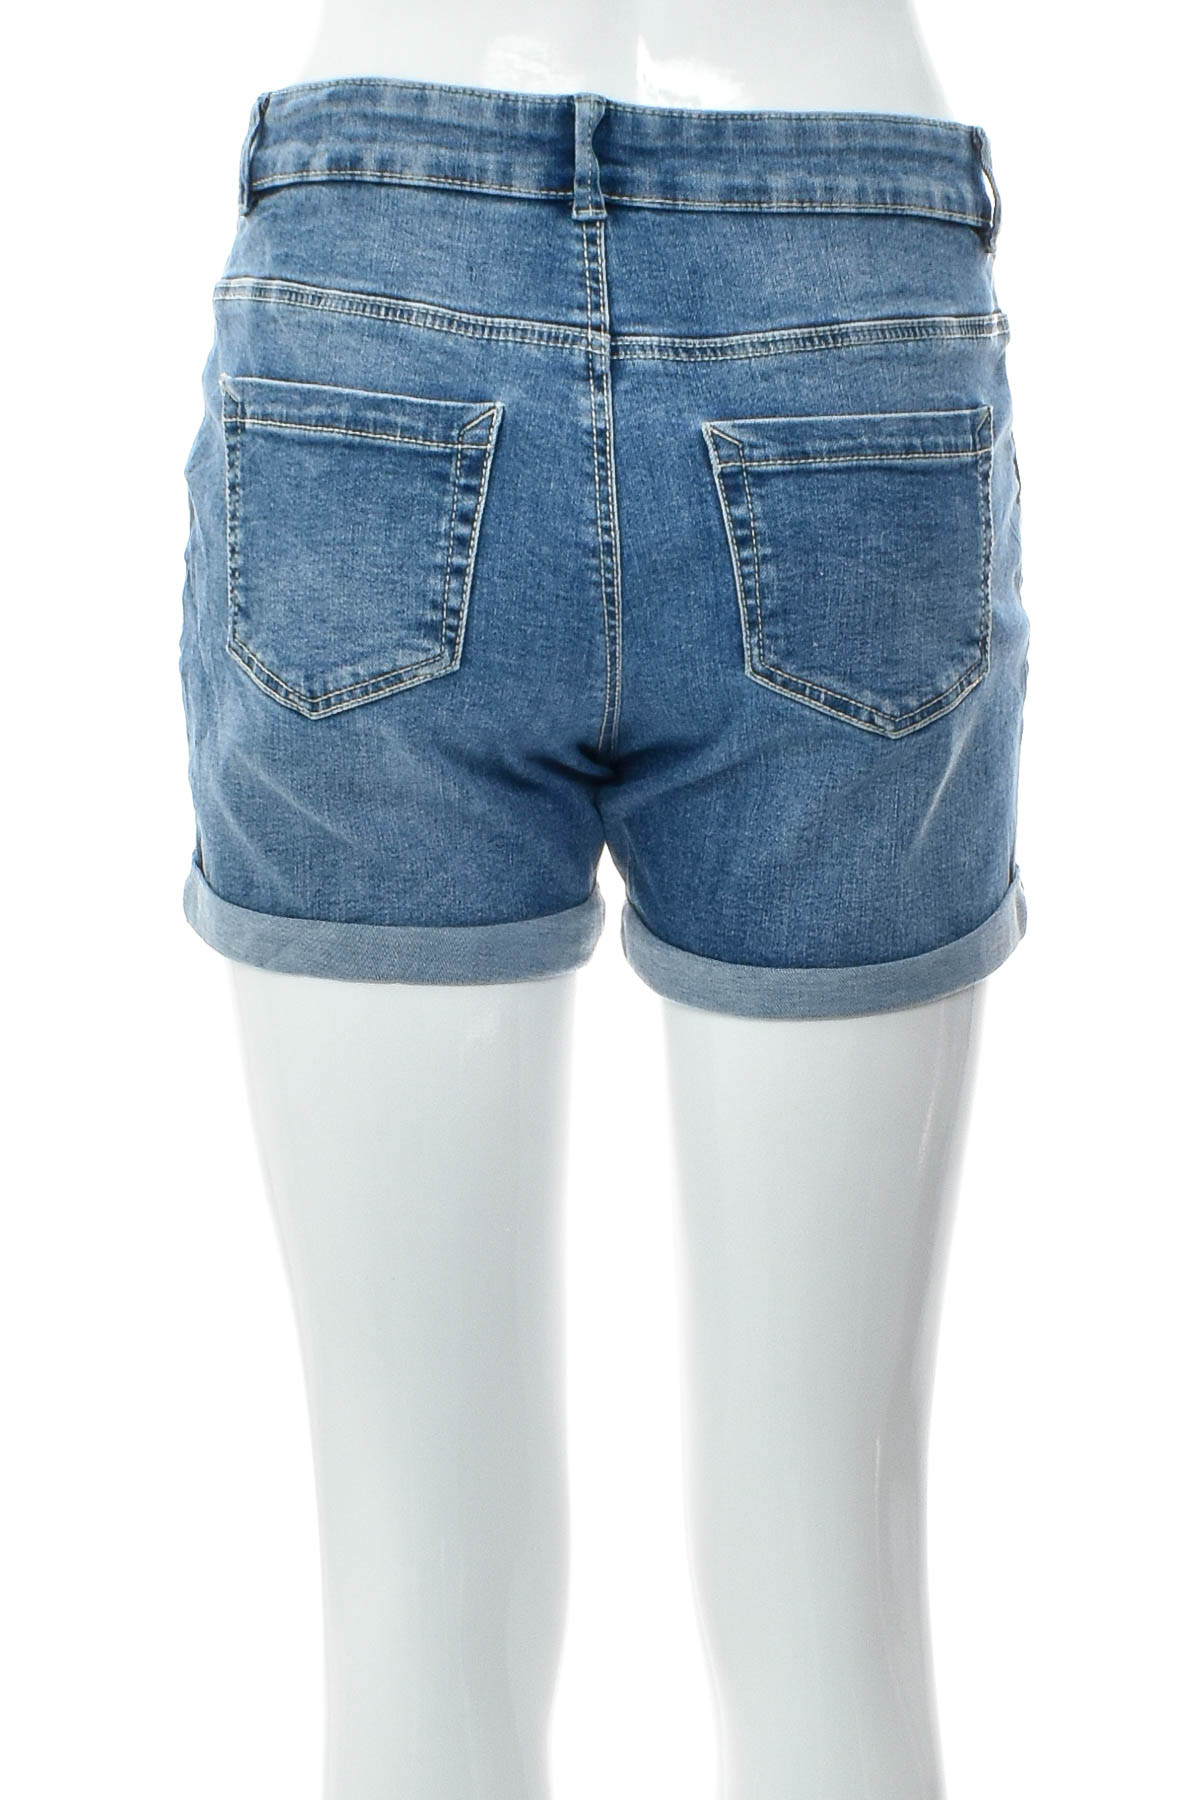 Shorts for girls - C&A - 1